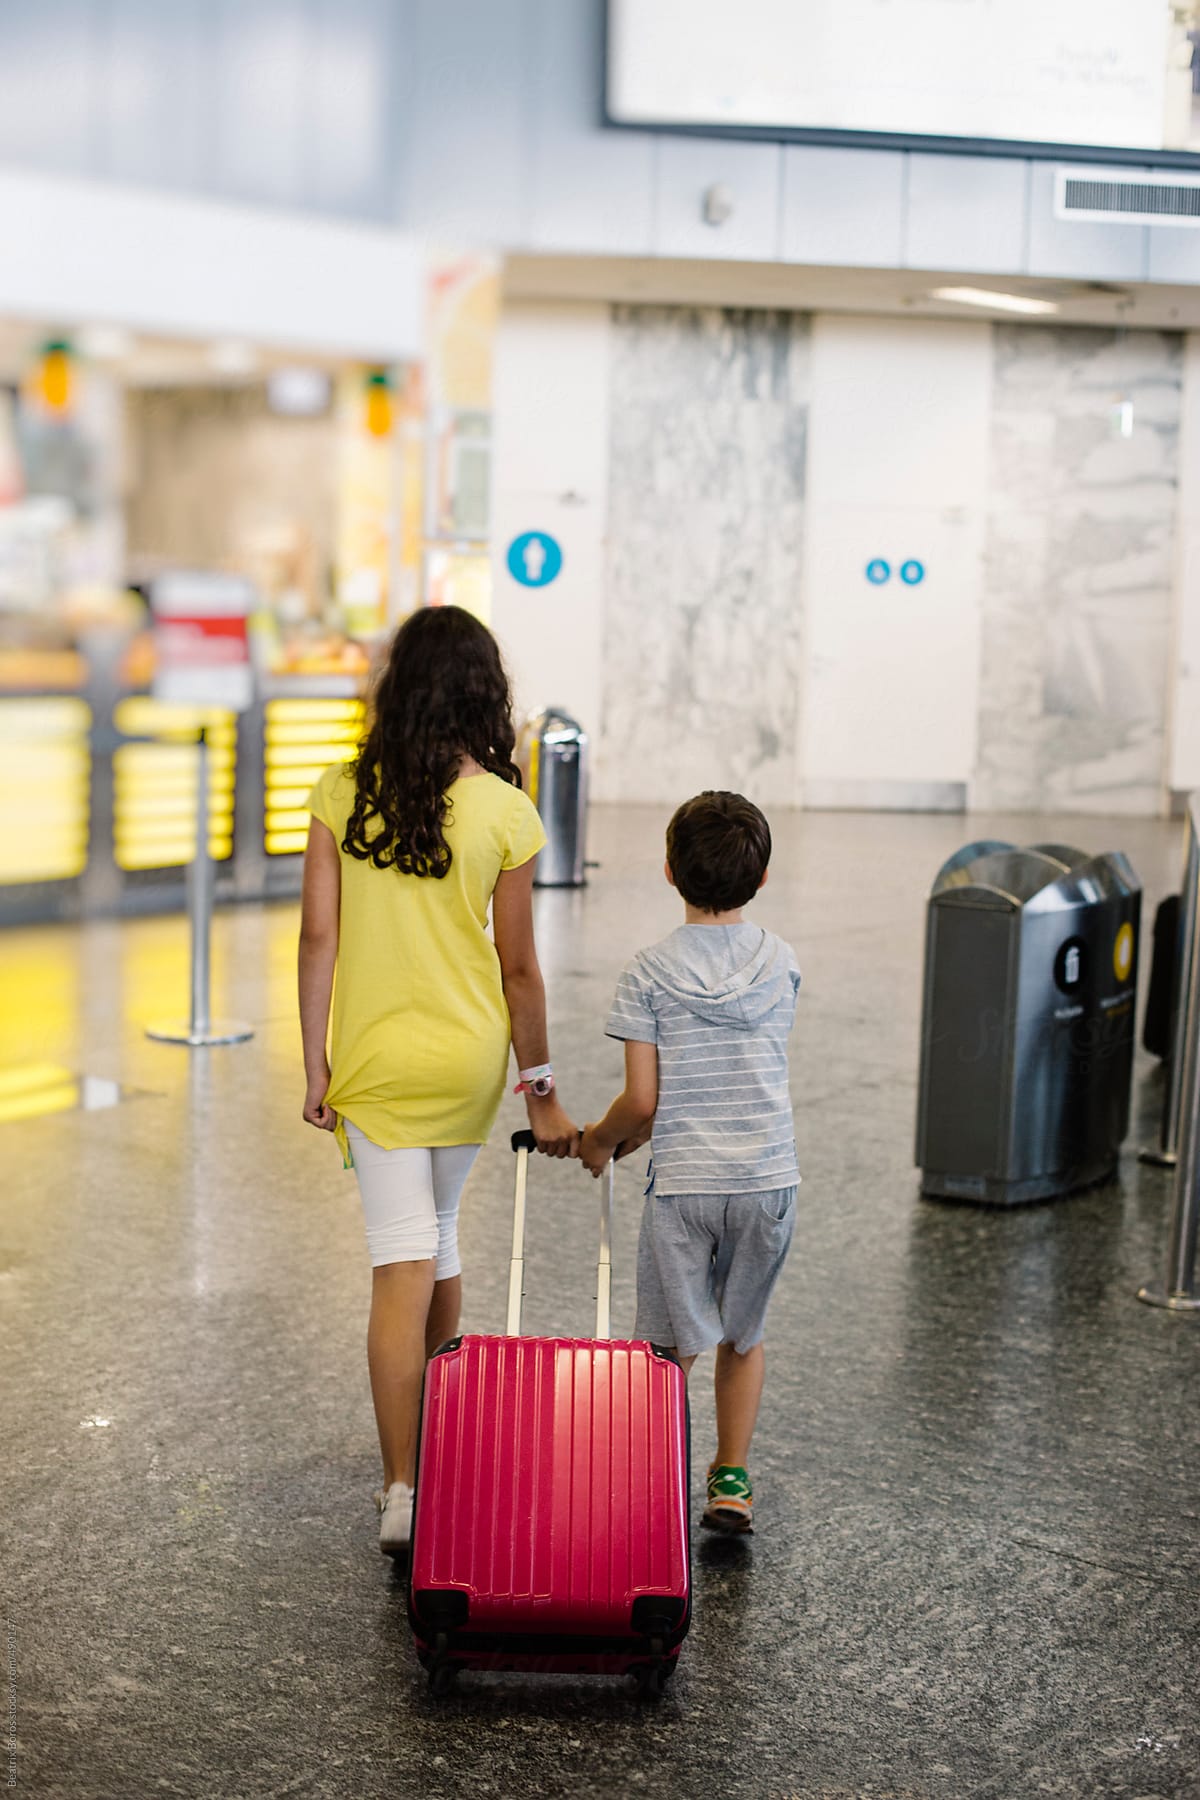 Siblings  walk away pulling together a pink luggage at the airport